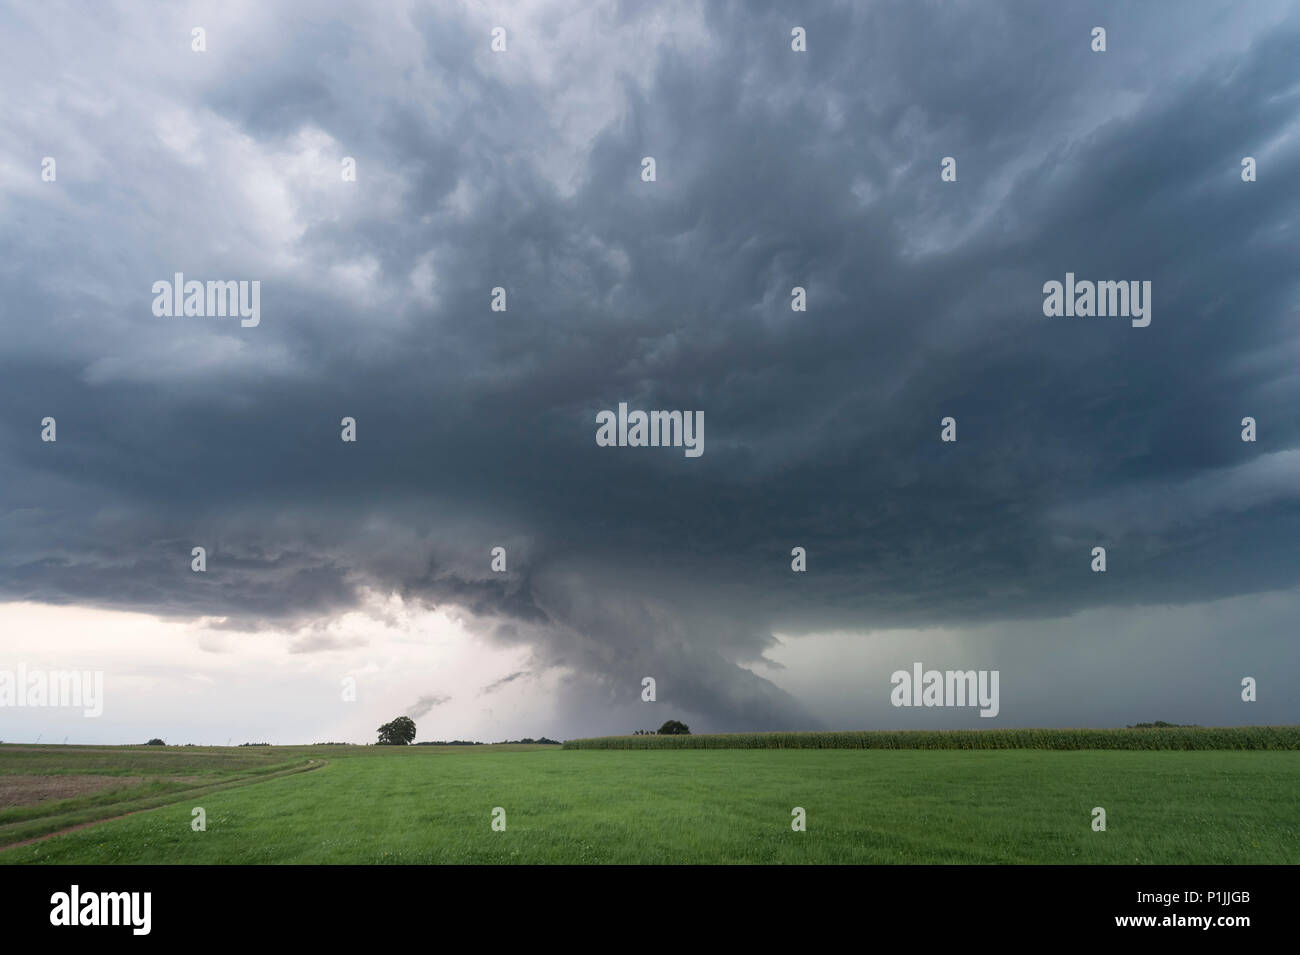 Very low wall cloud of a classic supercell near Altdorf, Nuremberg, Bavaria, Germany Stock Photo